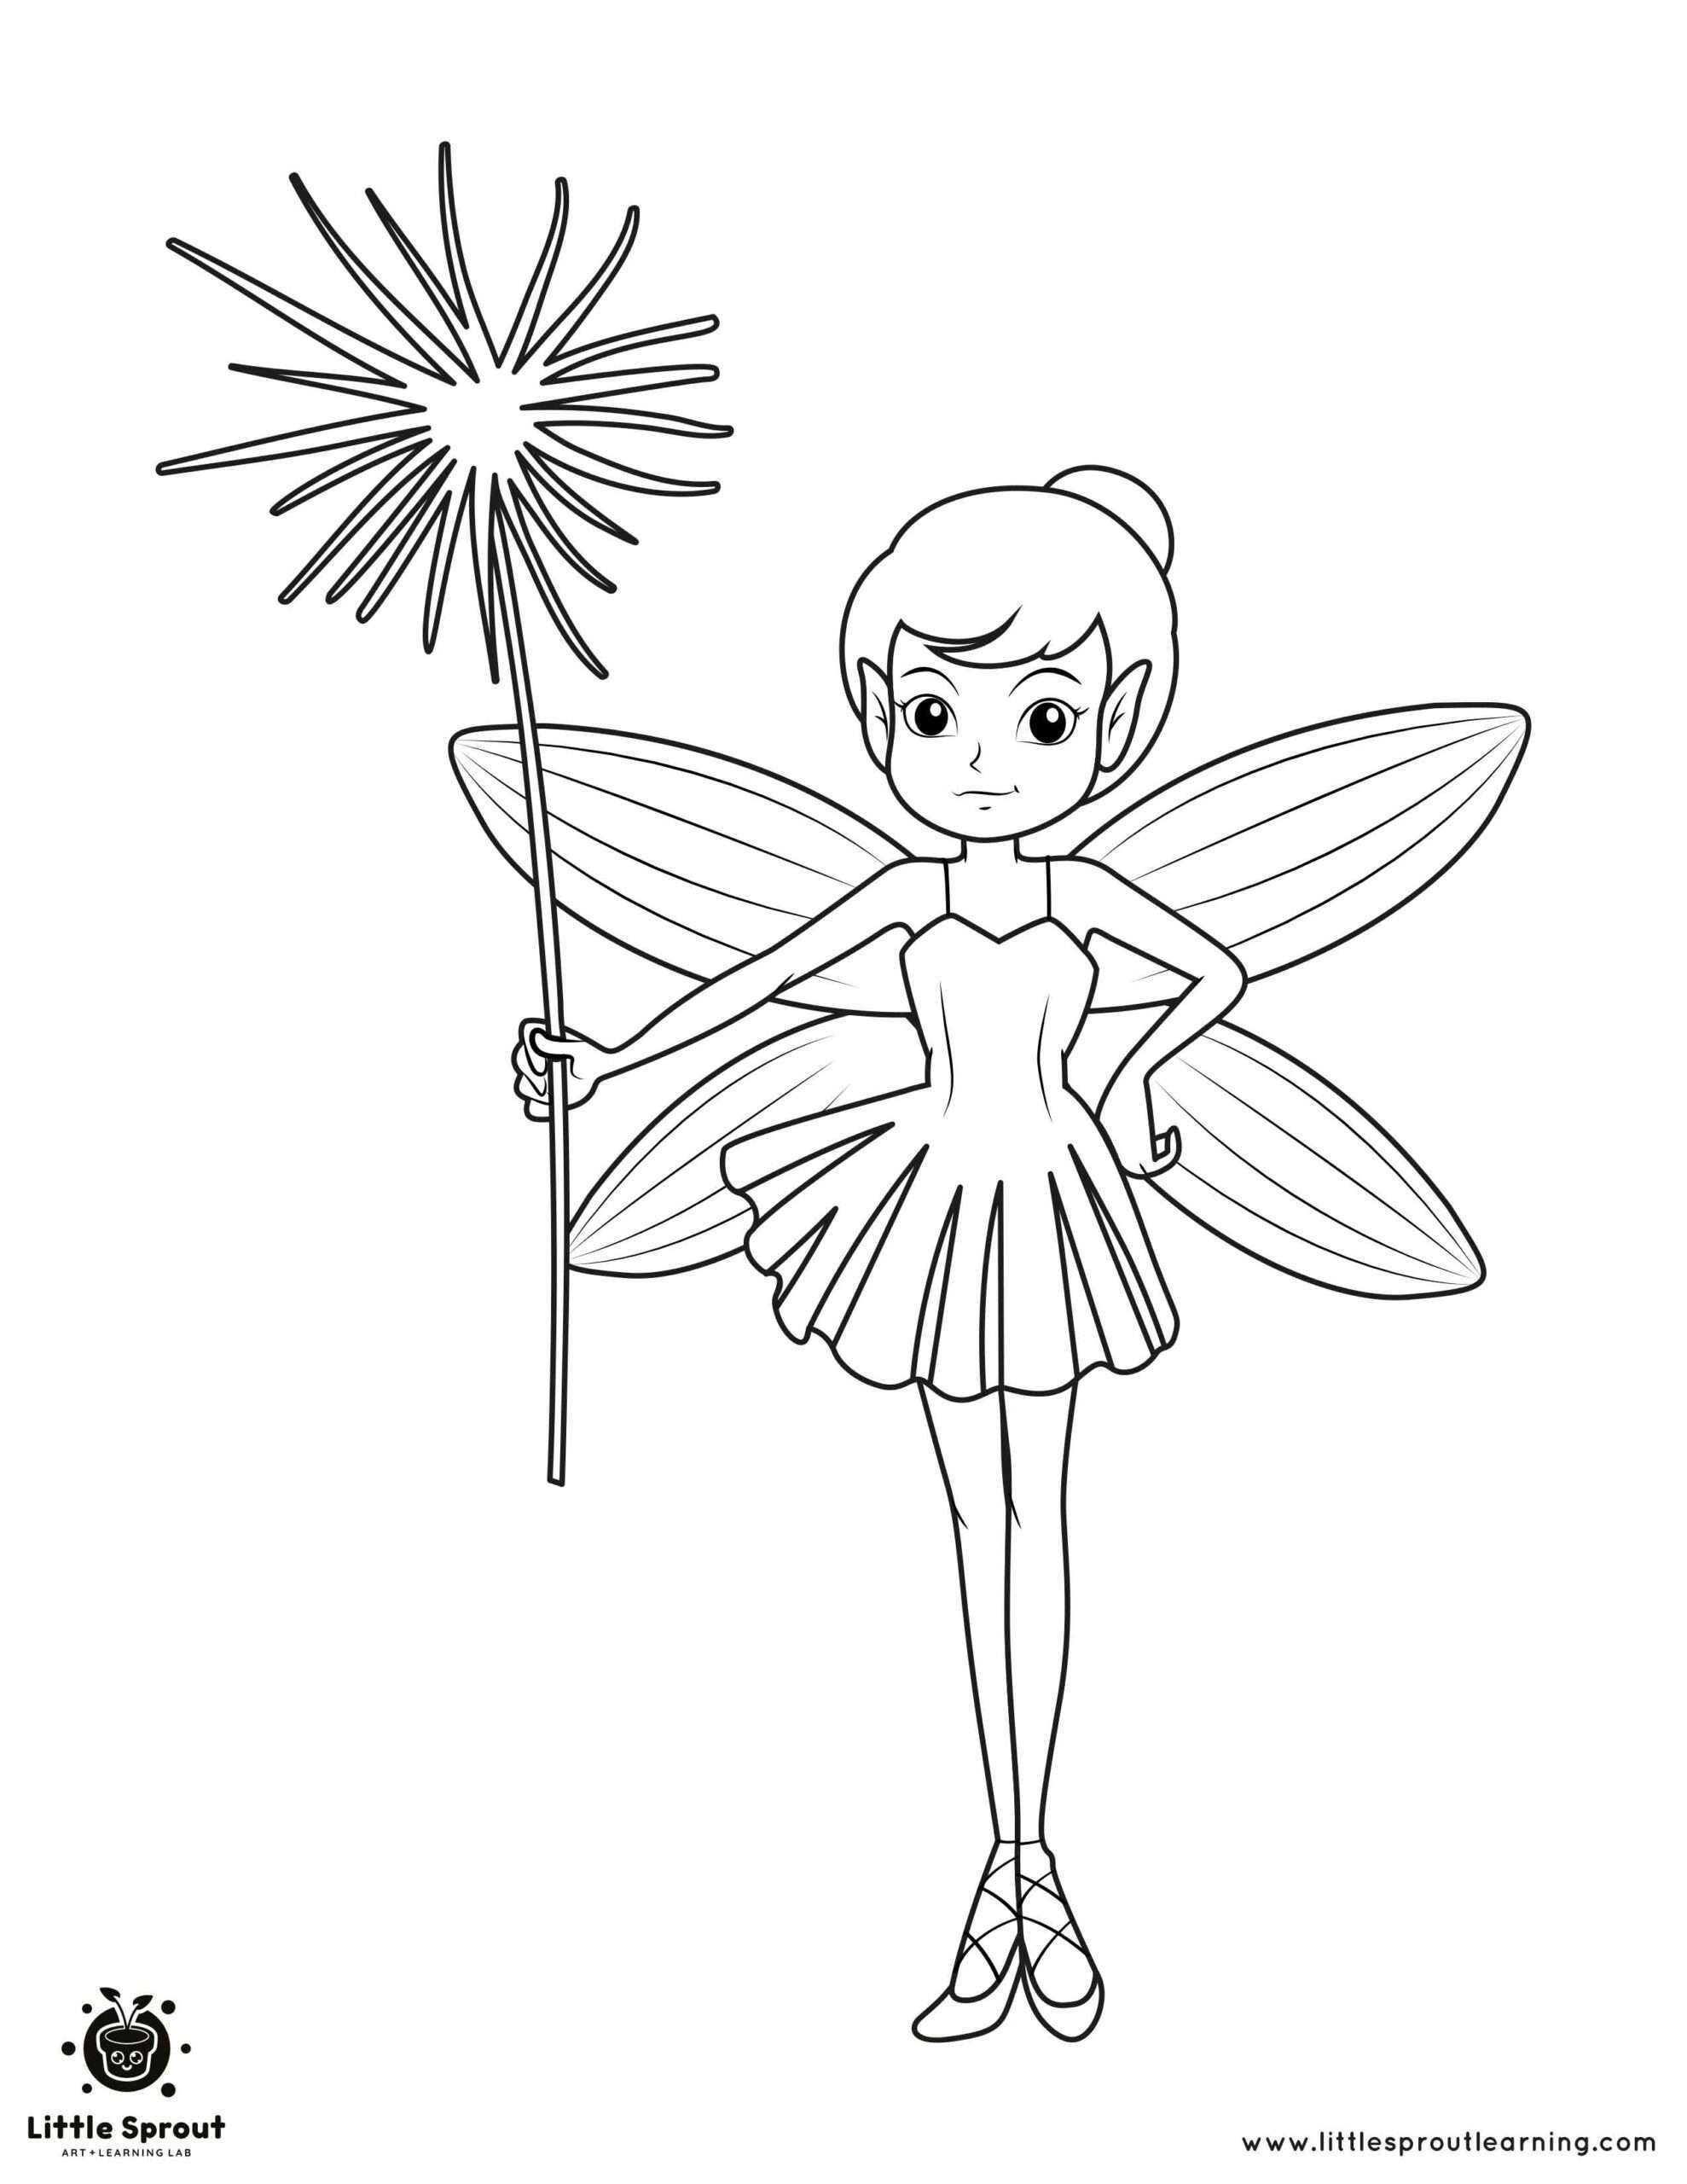 Magical fairy doll Coloring Page